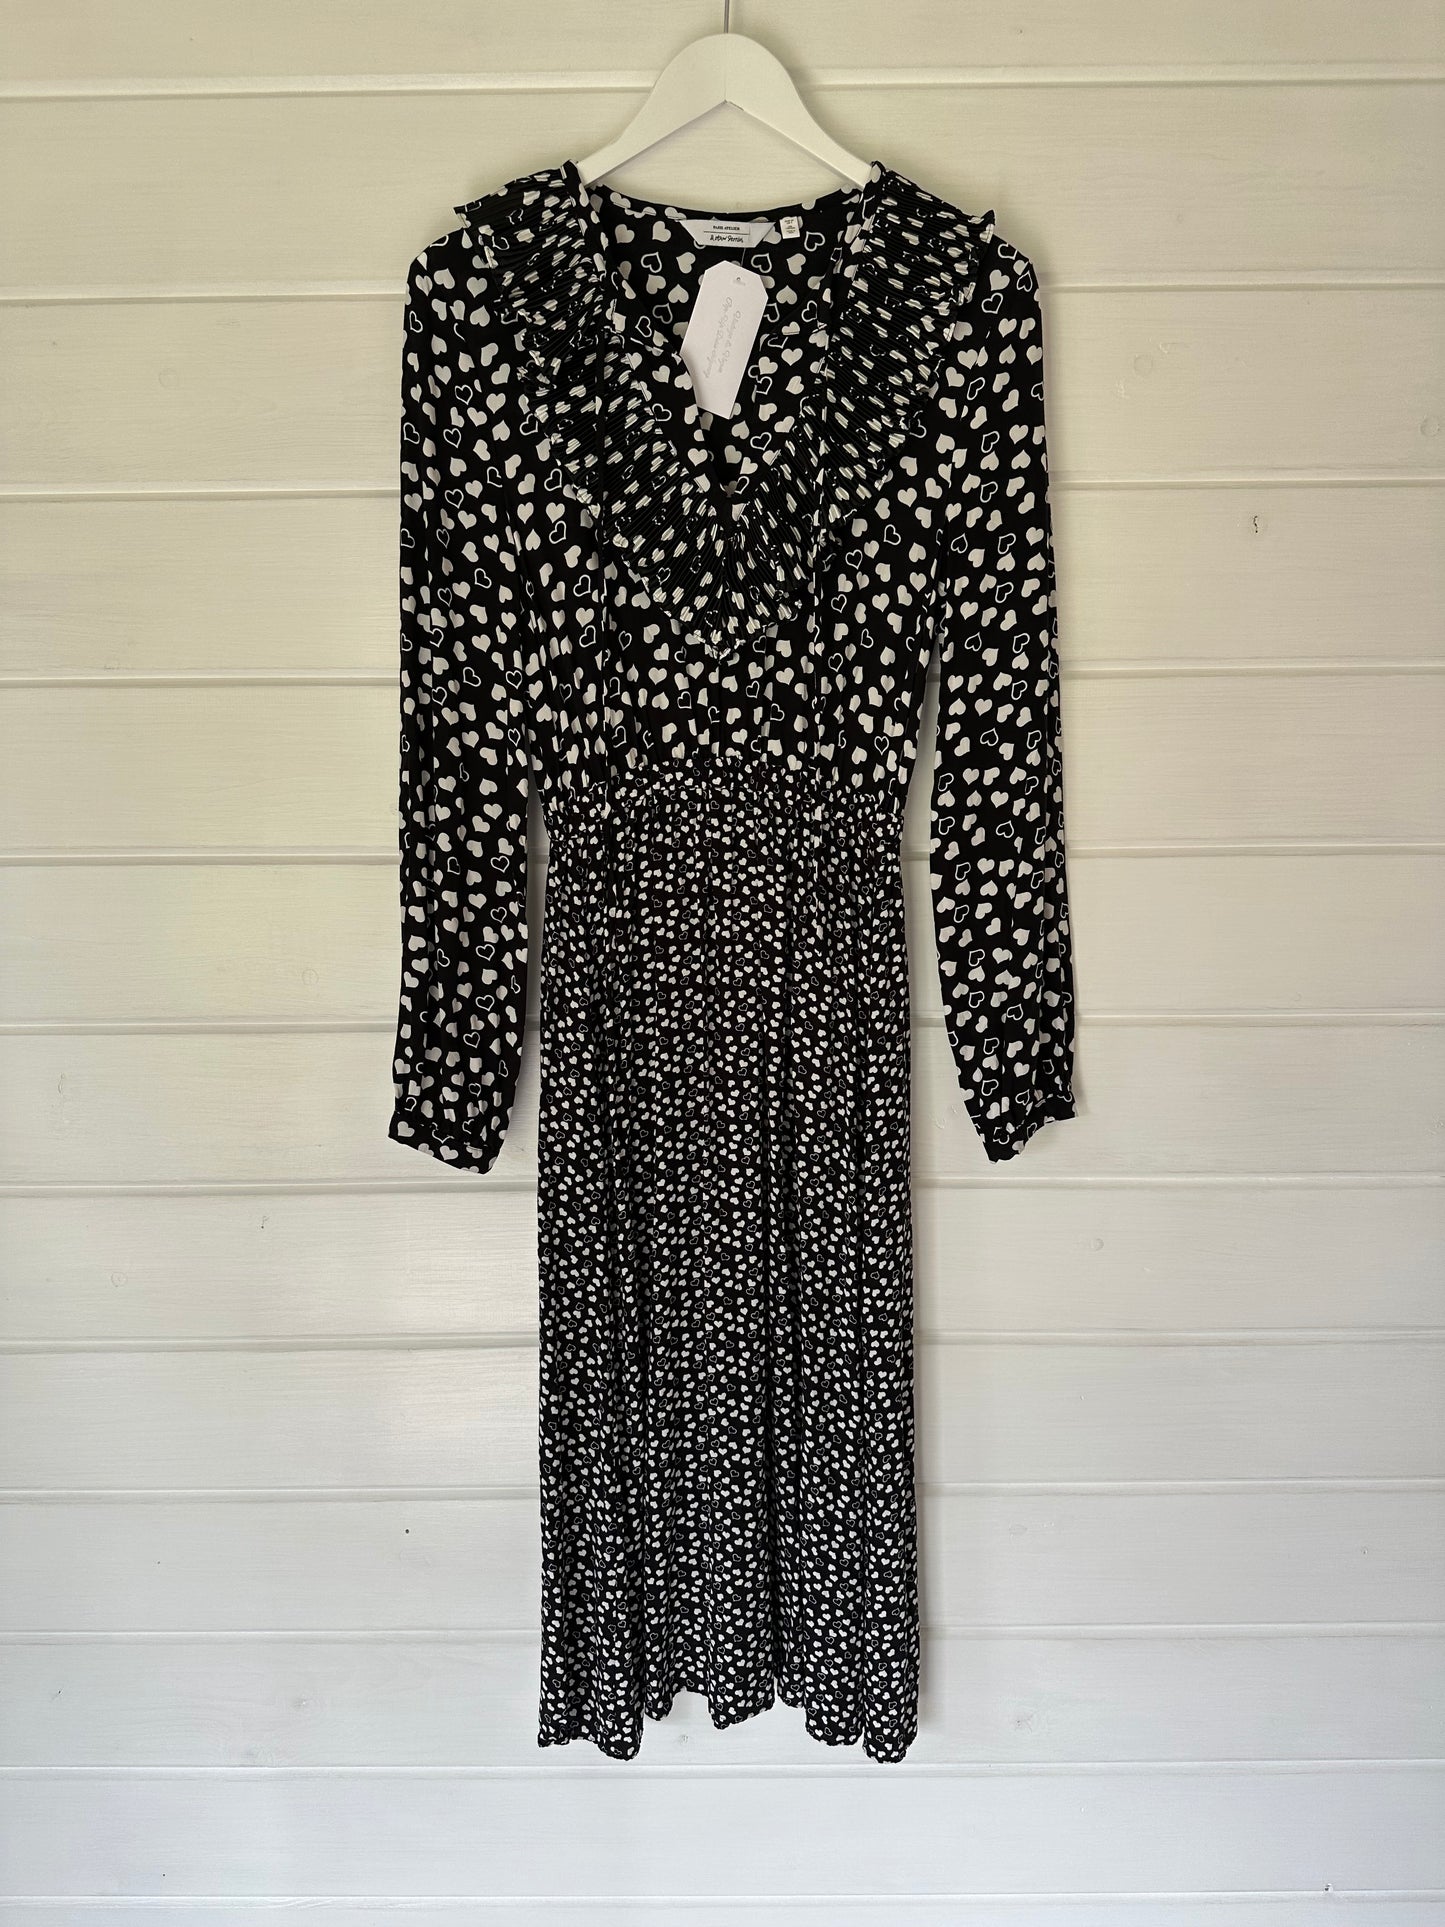 And Other Stories Dress - Size 8